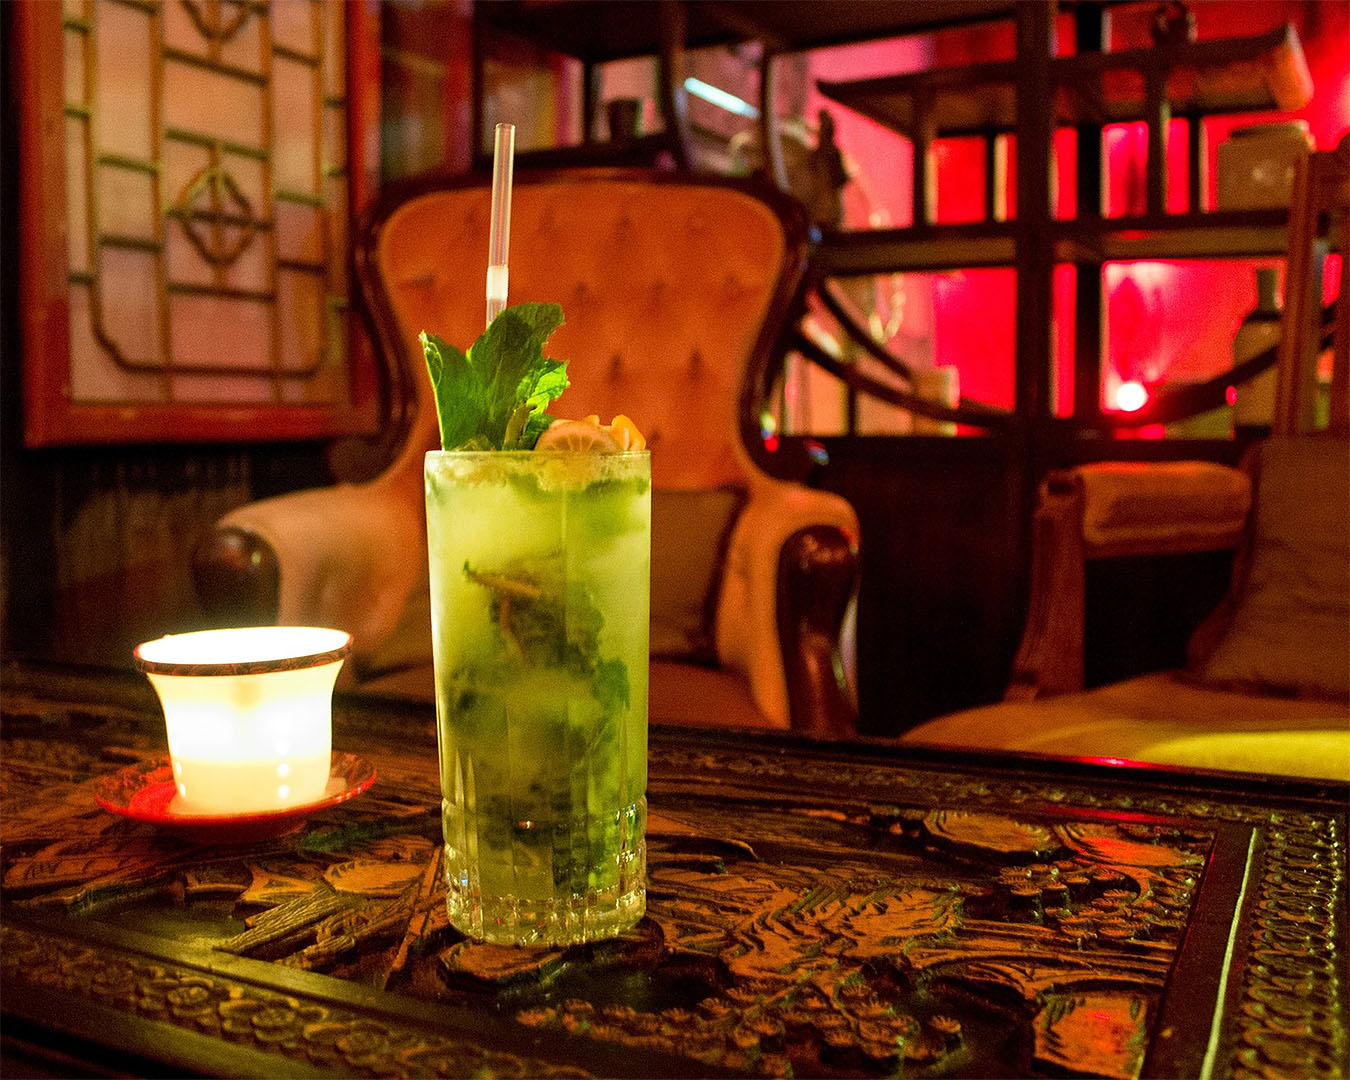 An appetising looking green drink on a table at Red Light District Bar.